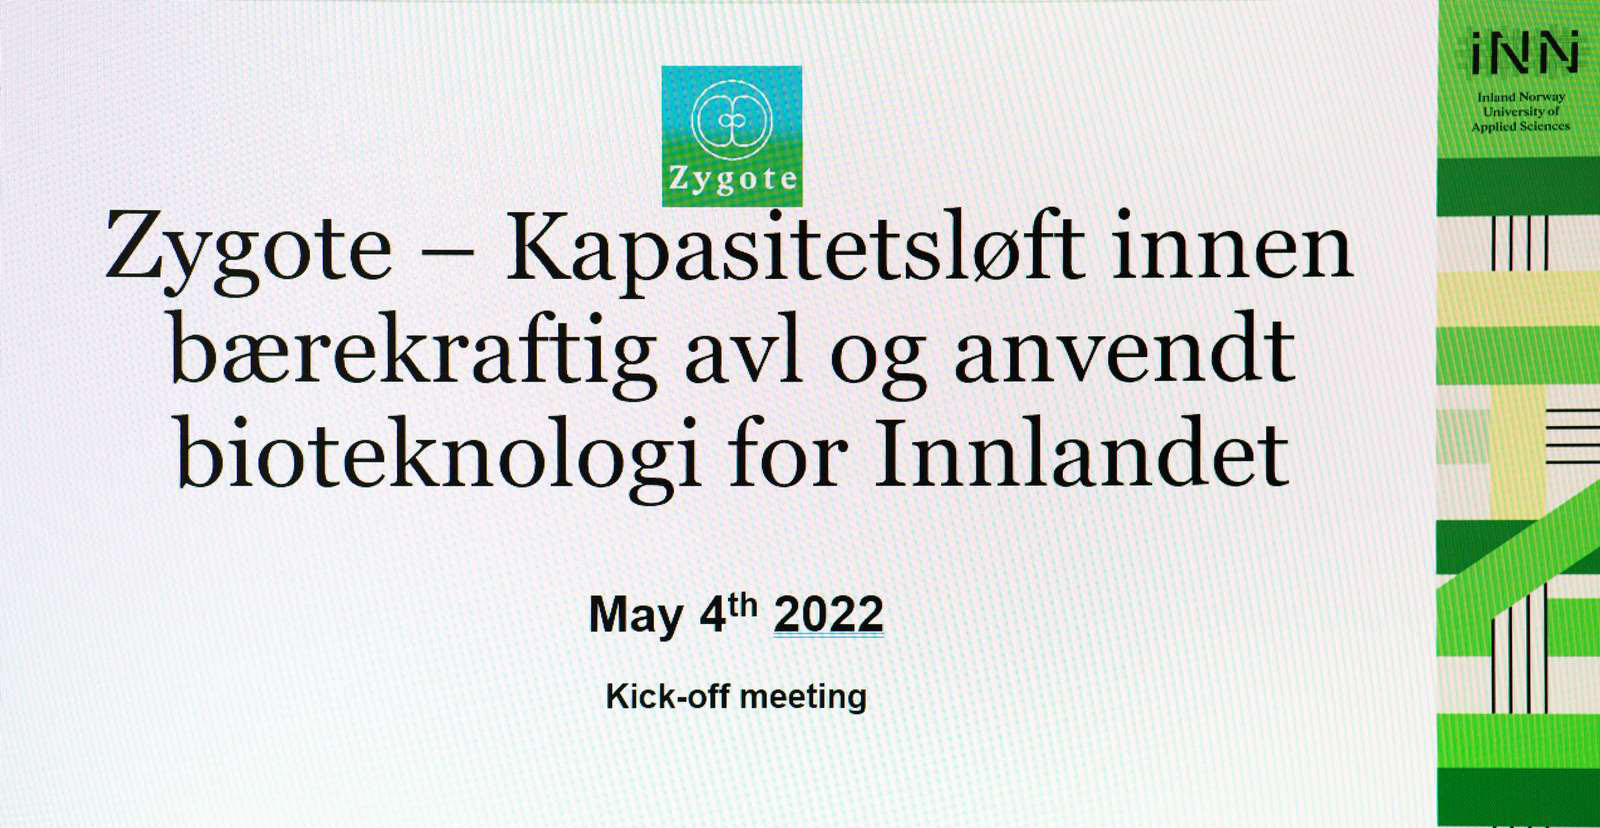 Front page with the title of the research project in Norwegian.